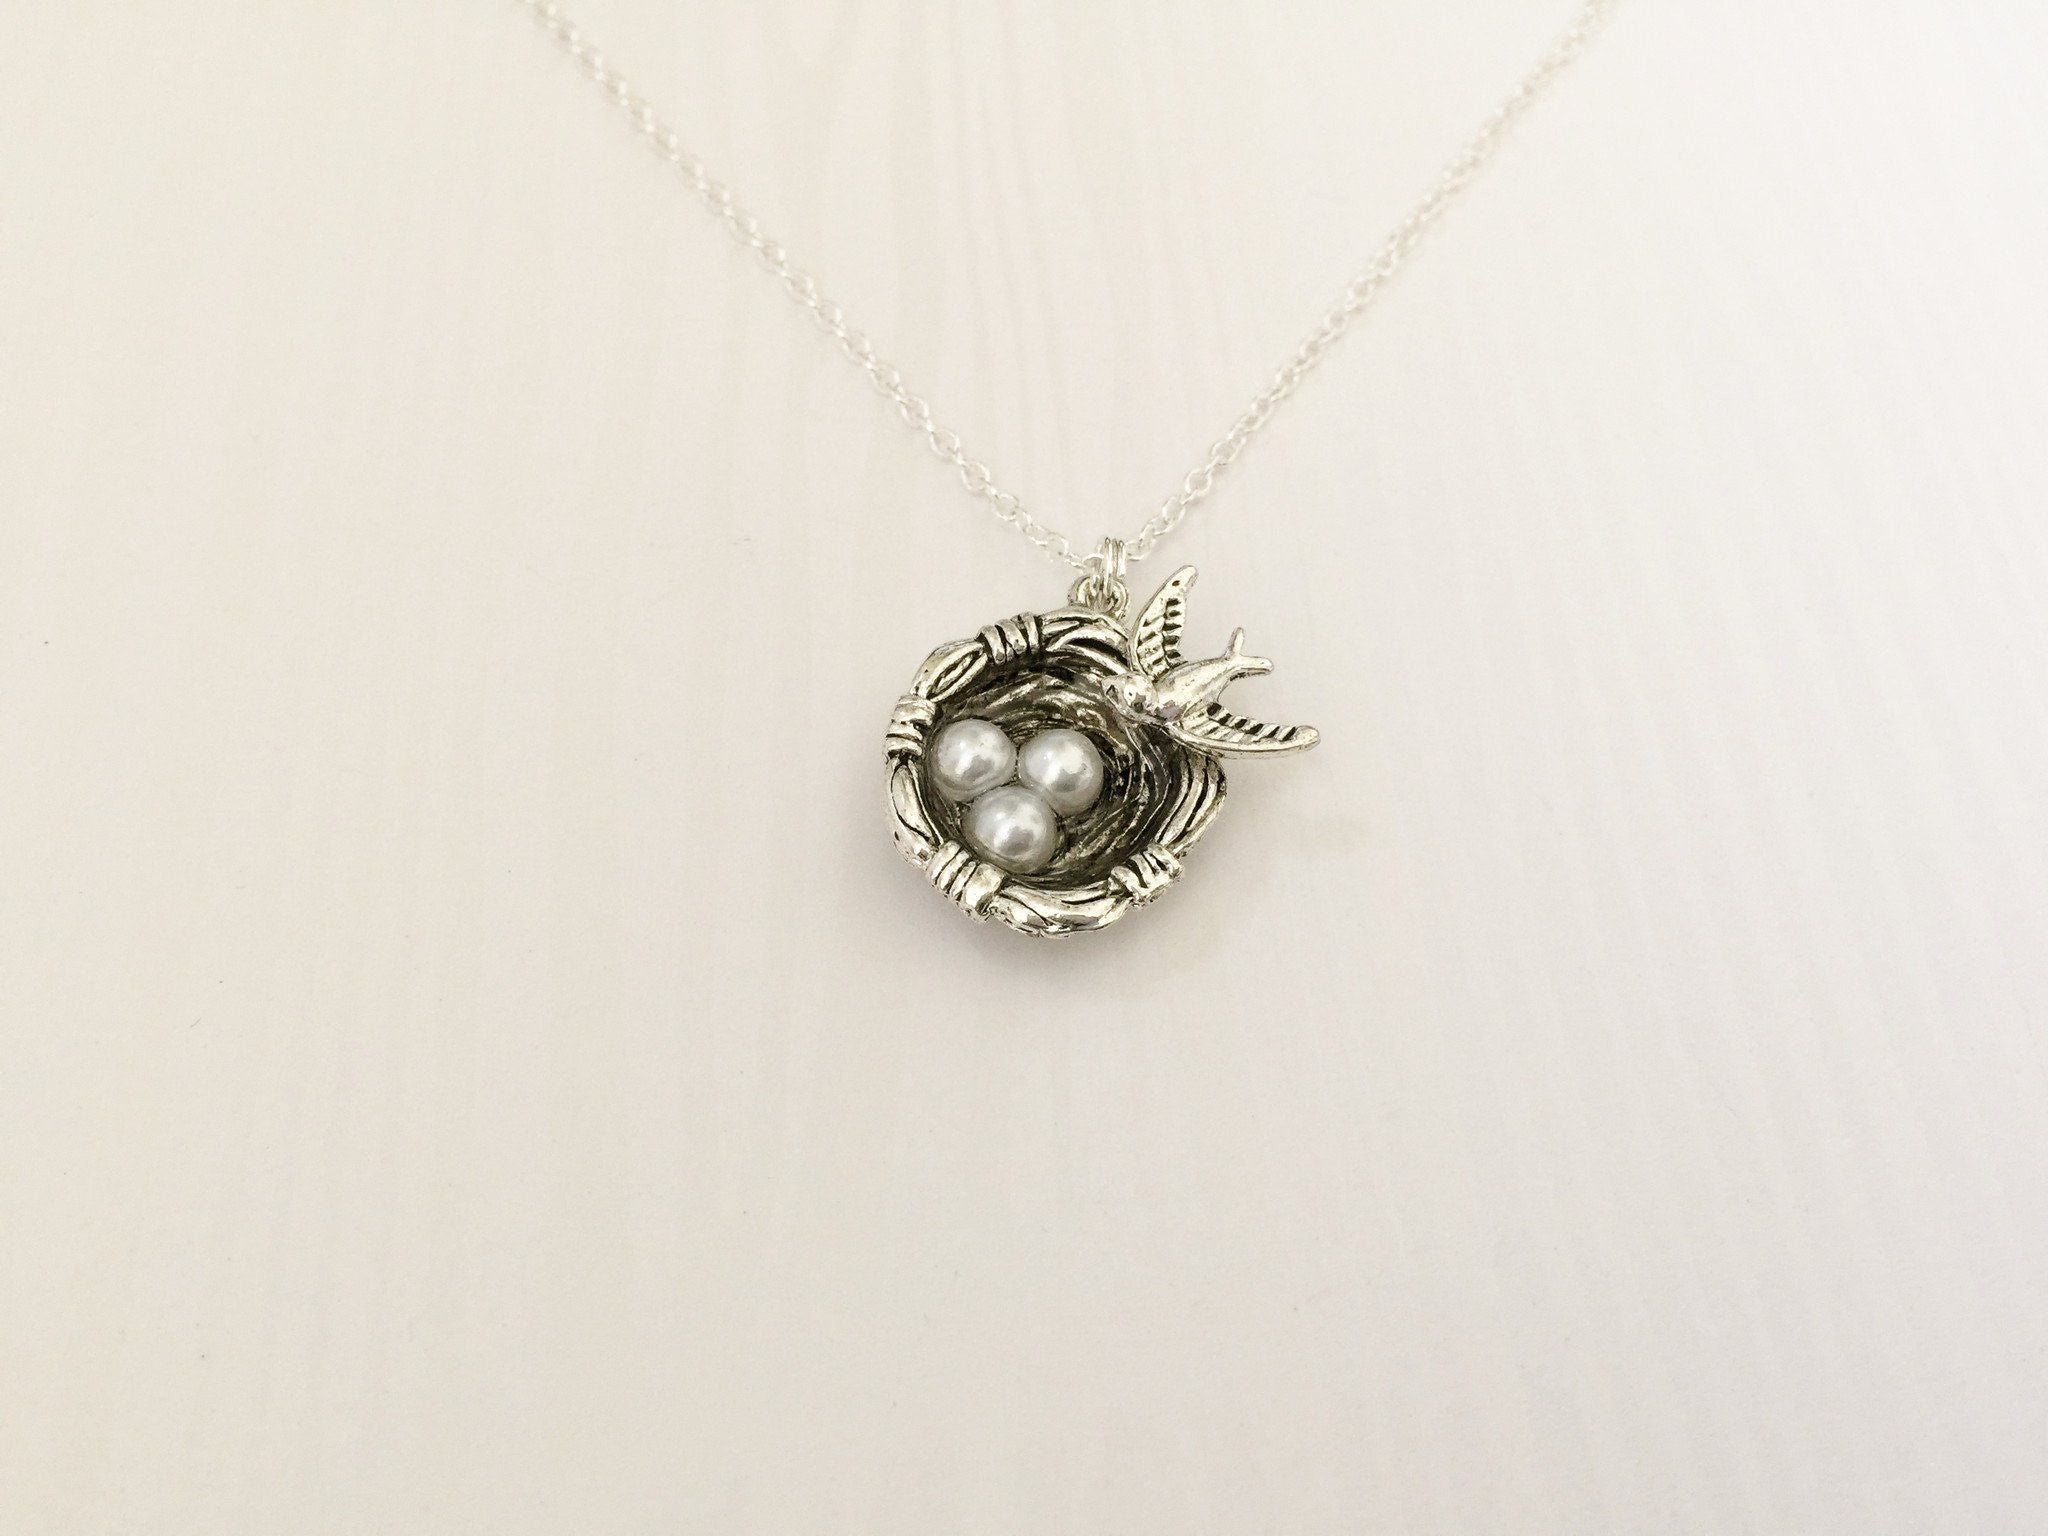 Birds Nest Necklace - Anomaly Creations & Designs